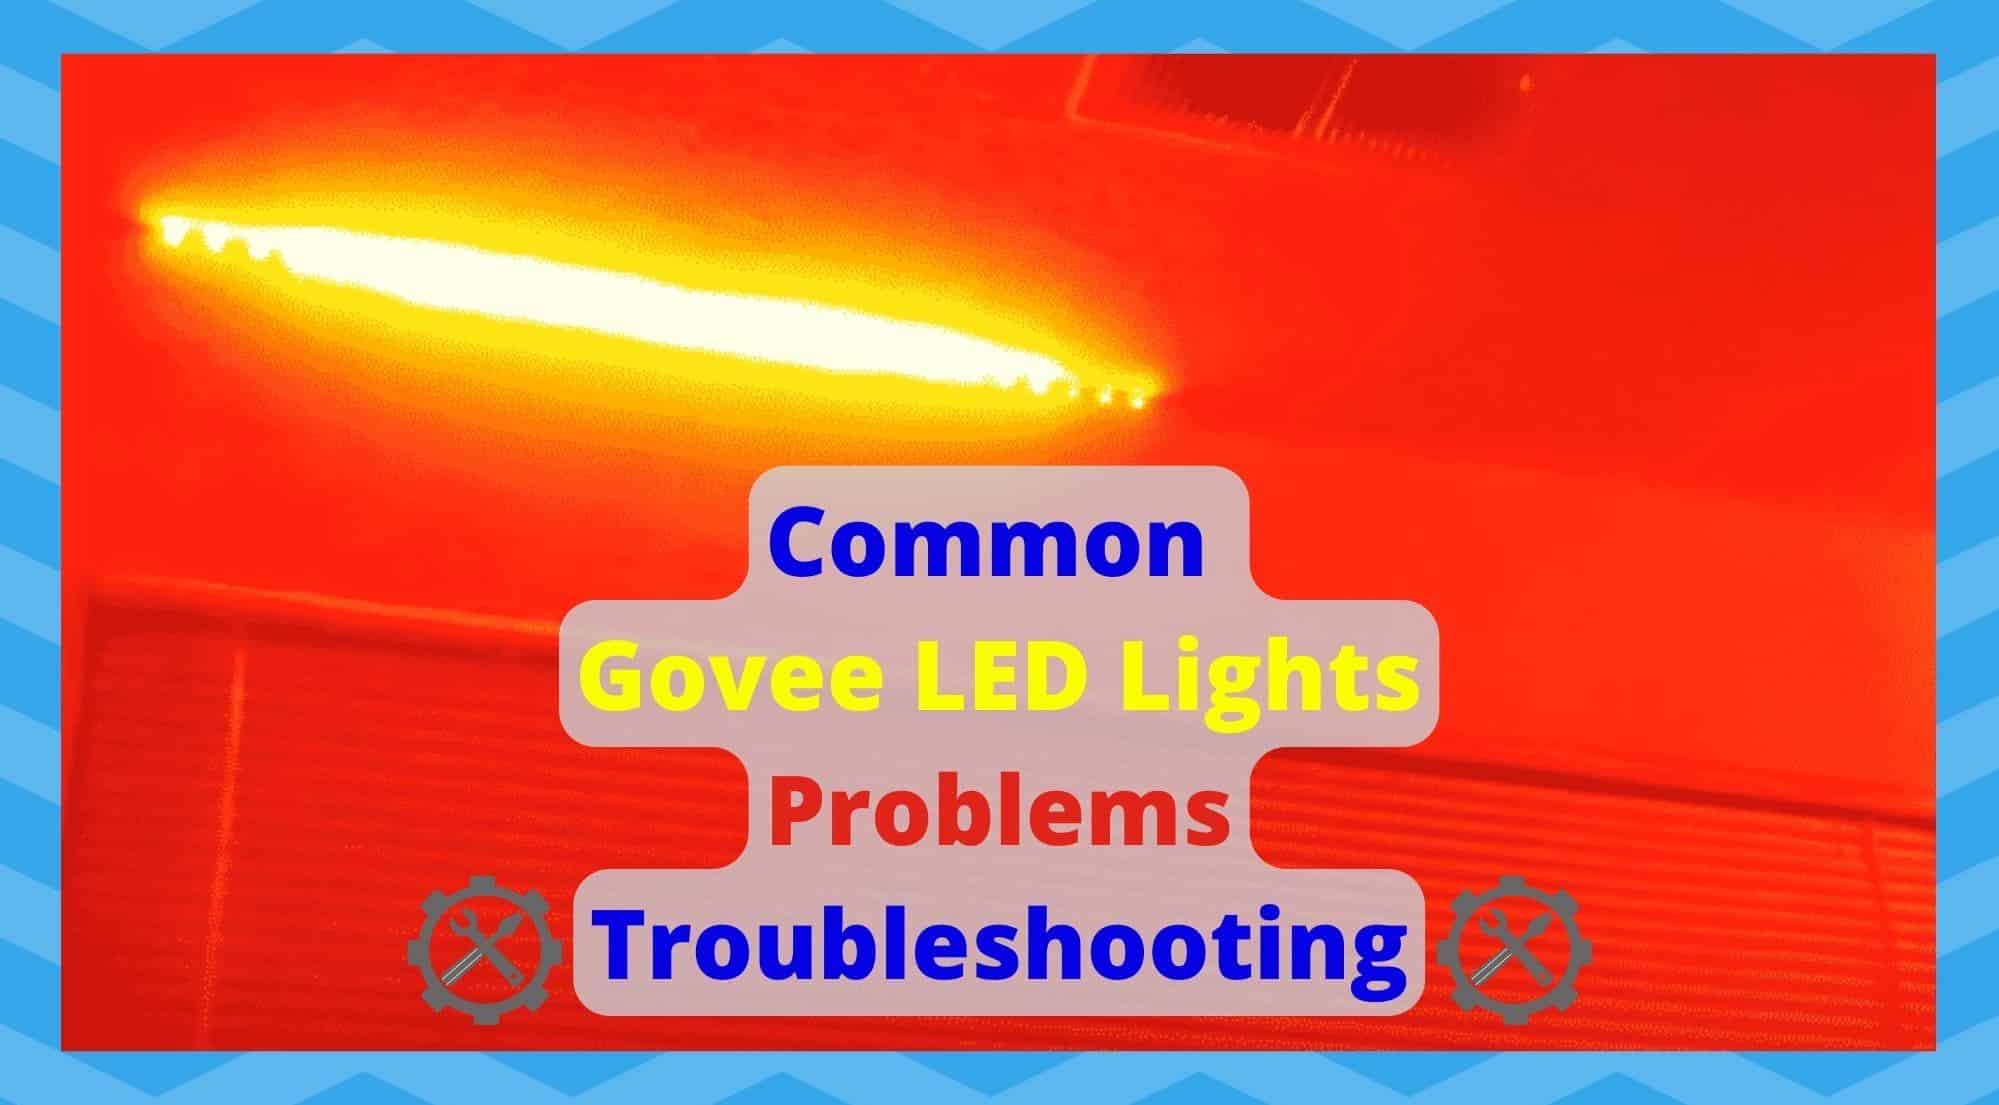 Common Govee LED Lights Problems Troubleshooting